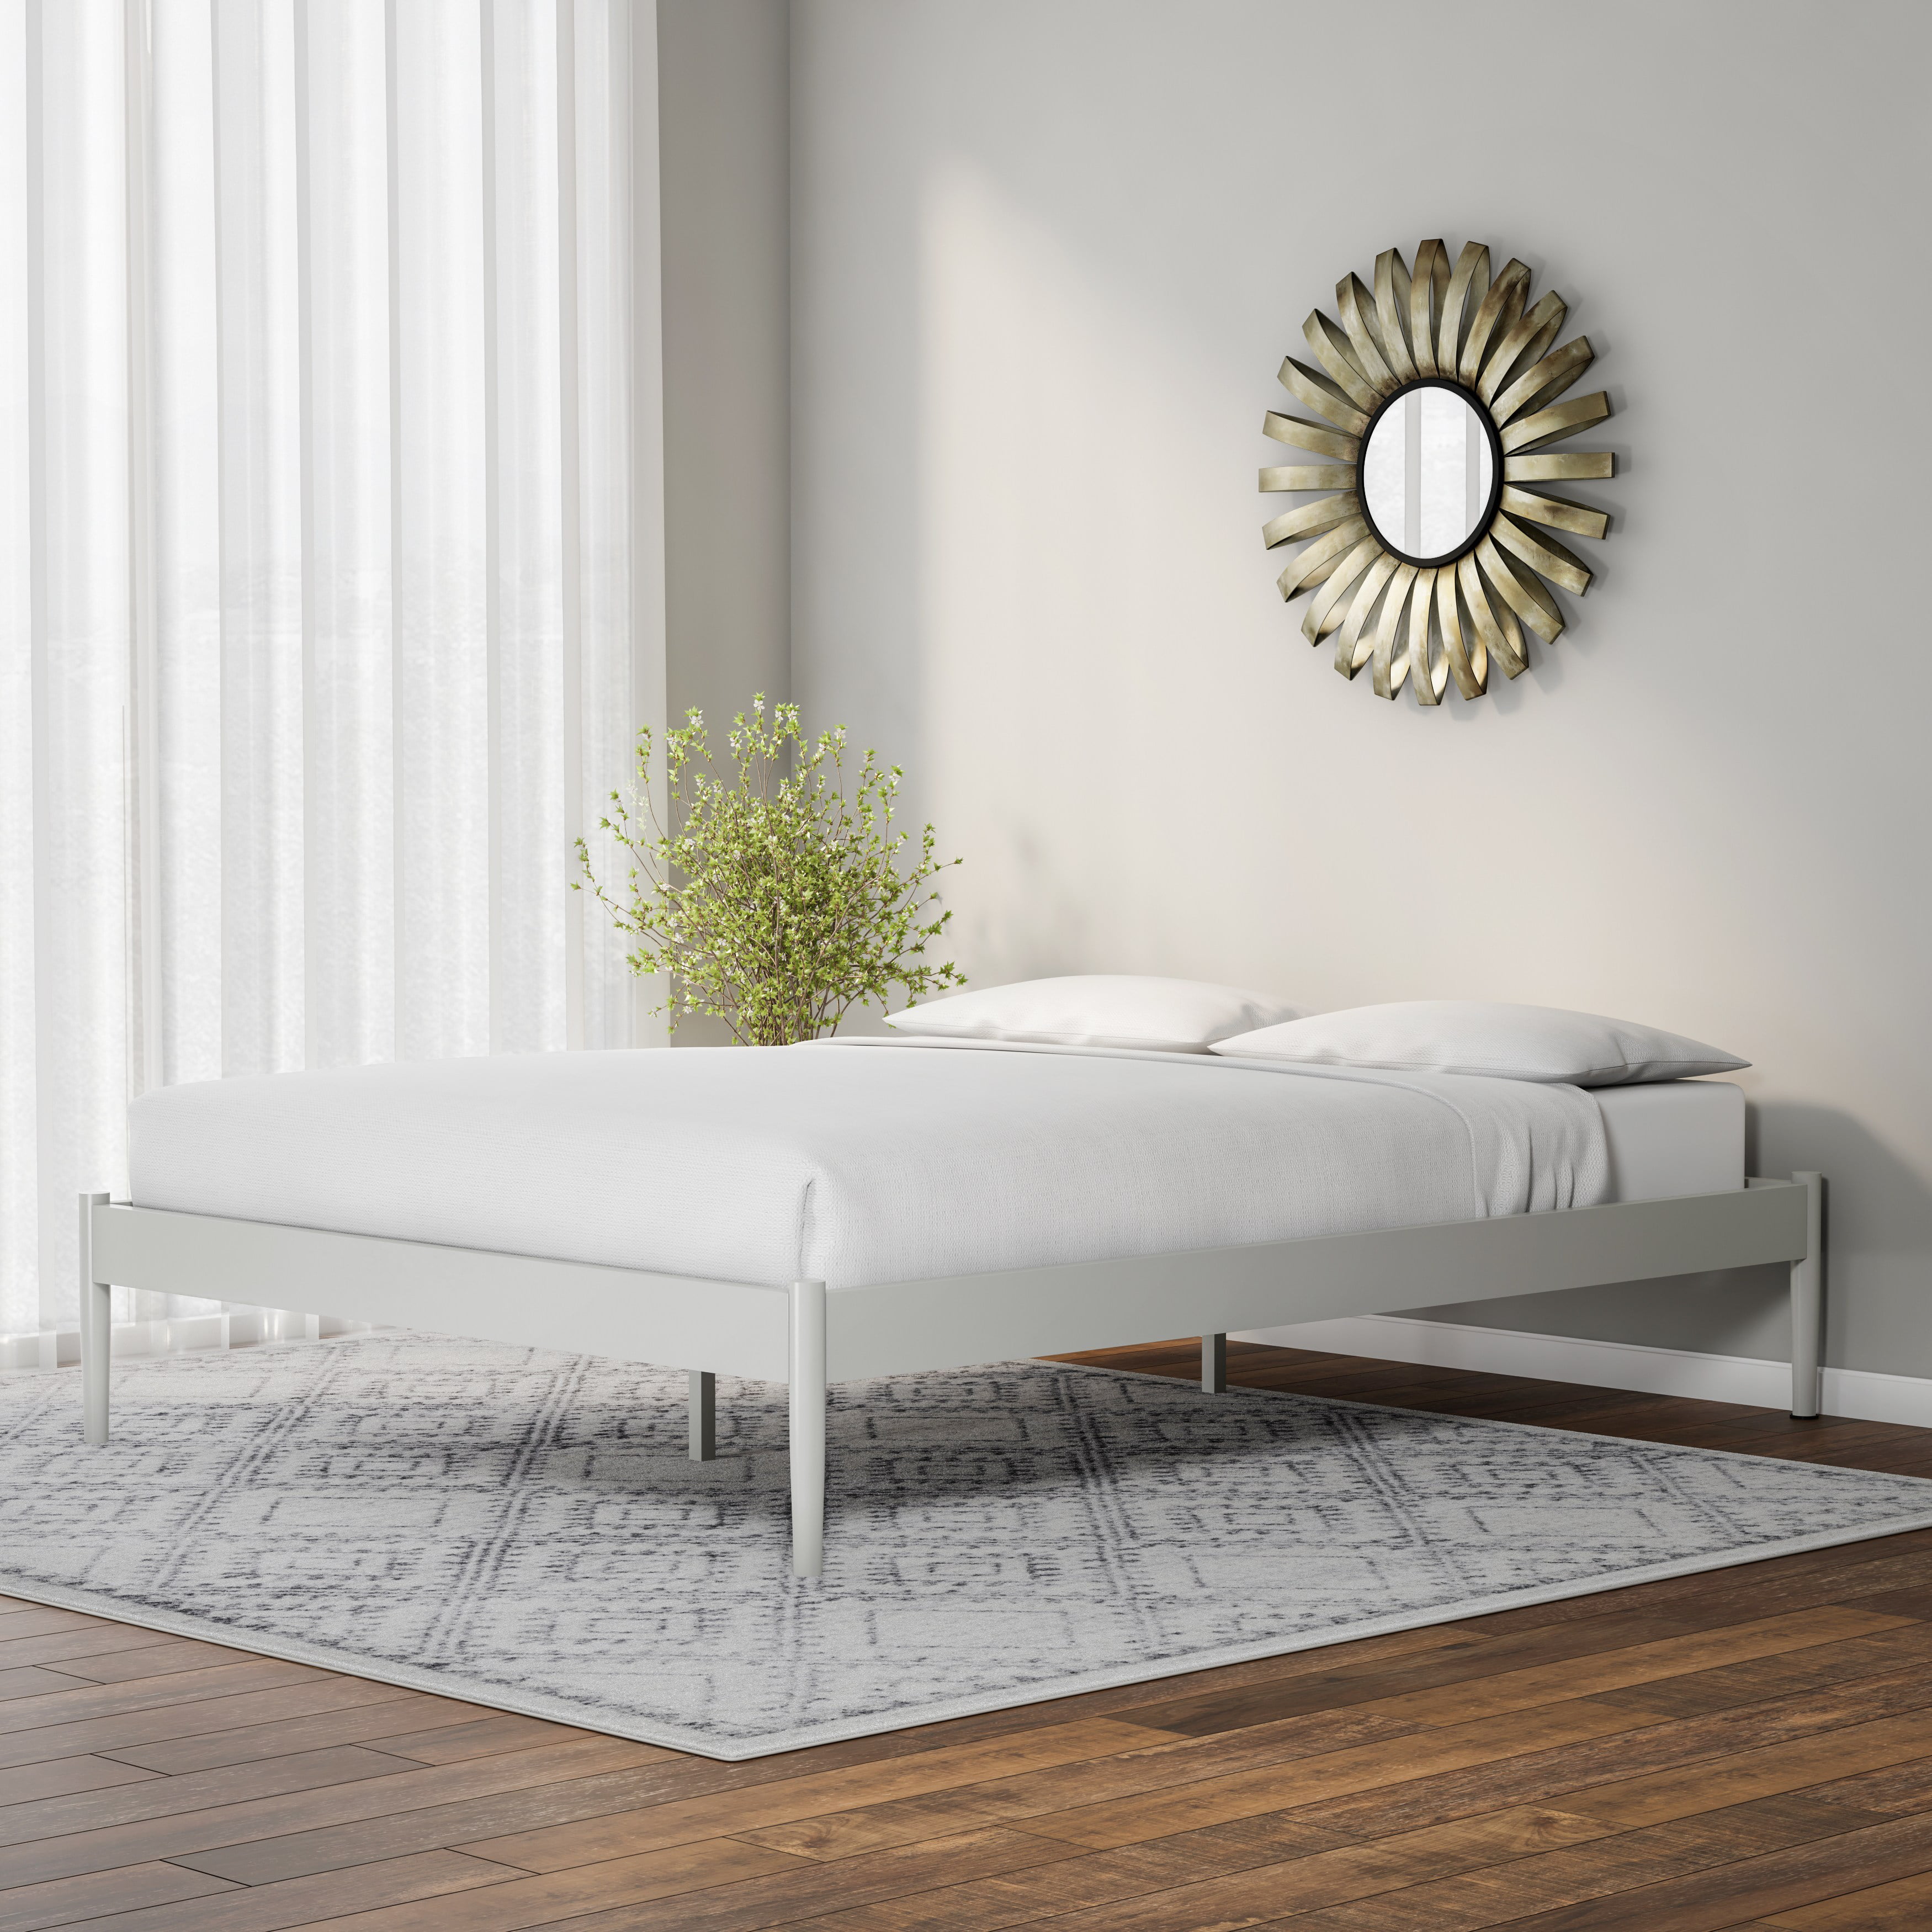 Carson Carrington Deje Stainless Steel, Stainless Steel Bed Frame Designs